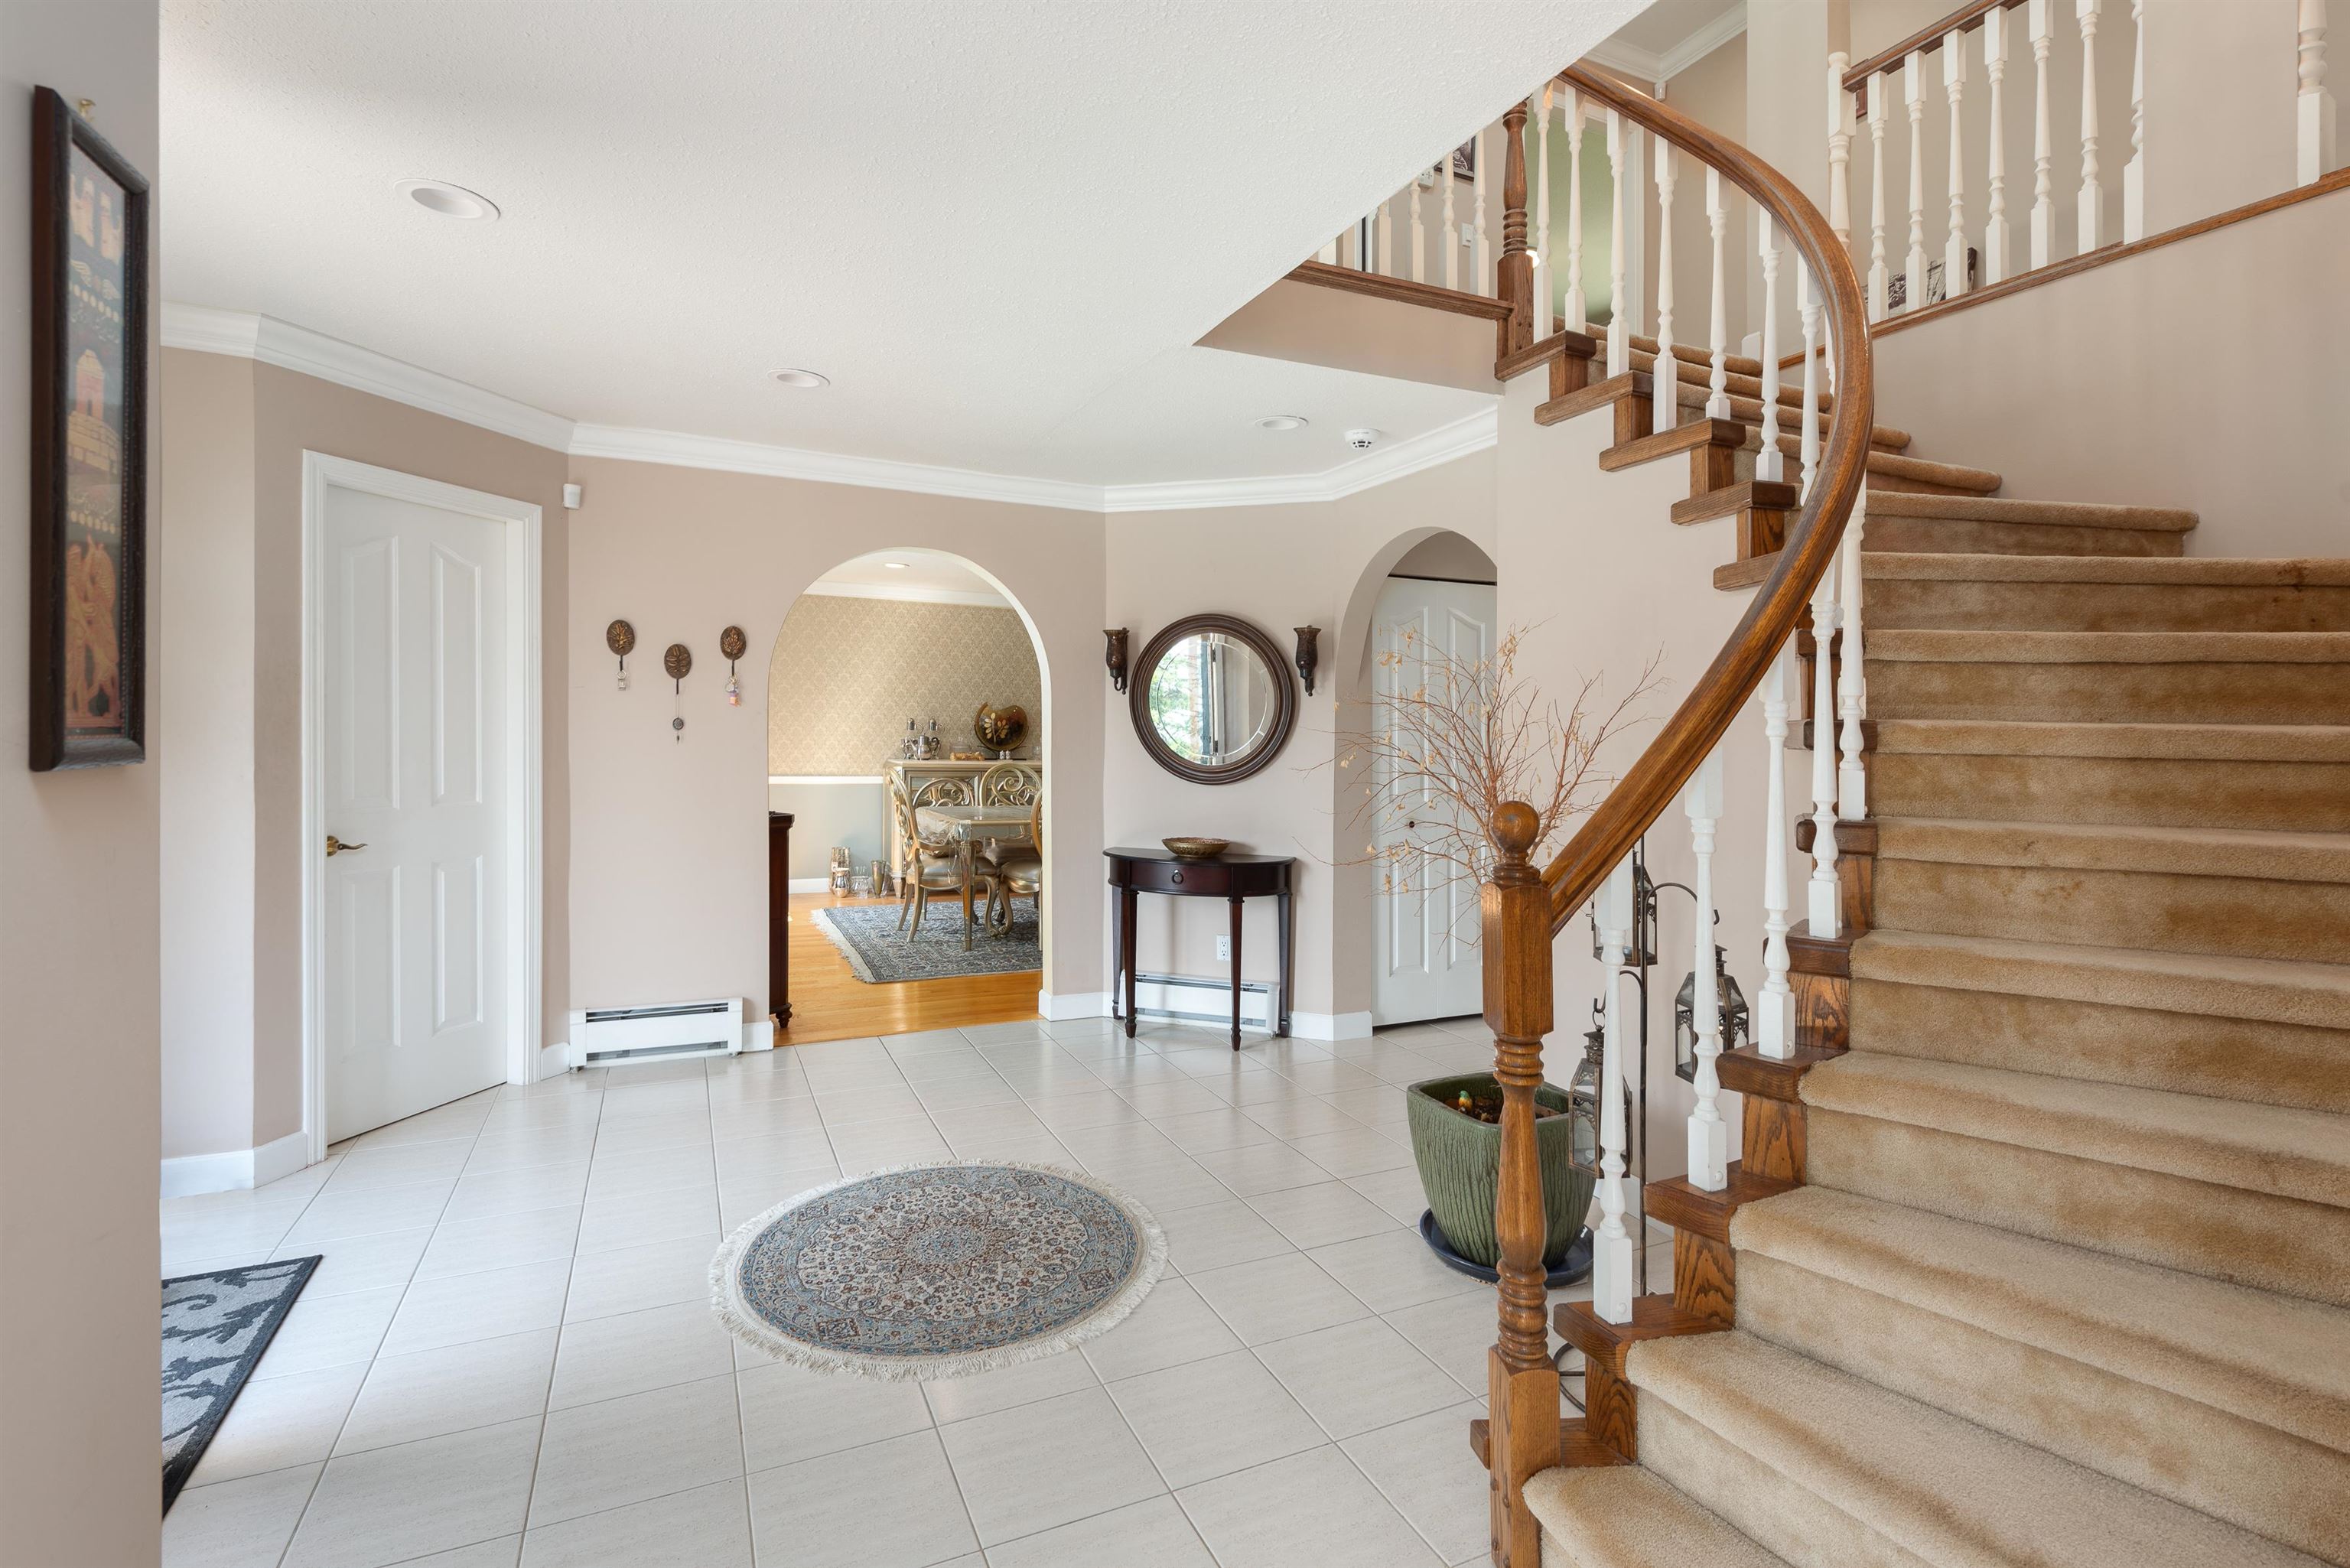 Listing image of 2362 WESTHILL DRIVE